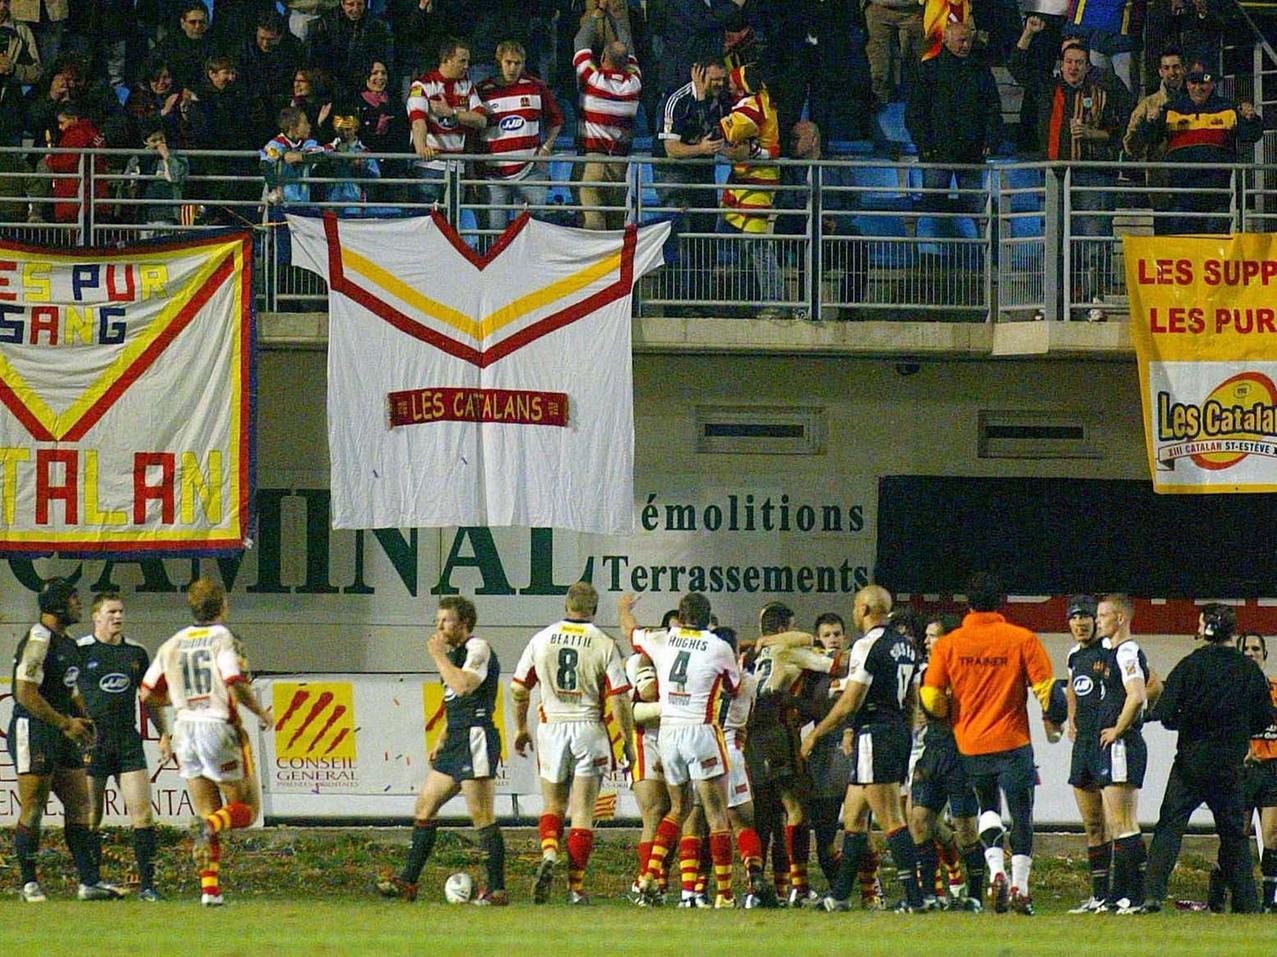 It was 14 years ago yesterday when Catalans played their first ever Super League game  beating Wigan 38-30.